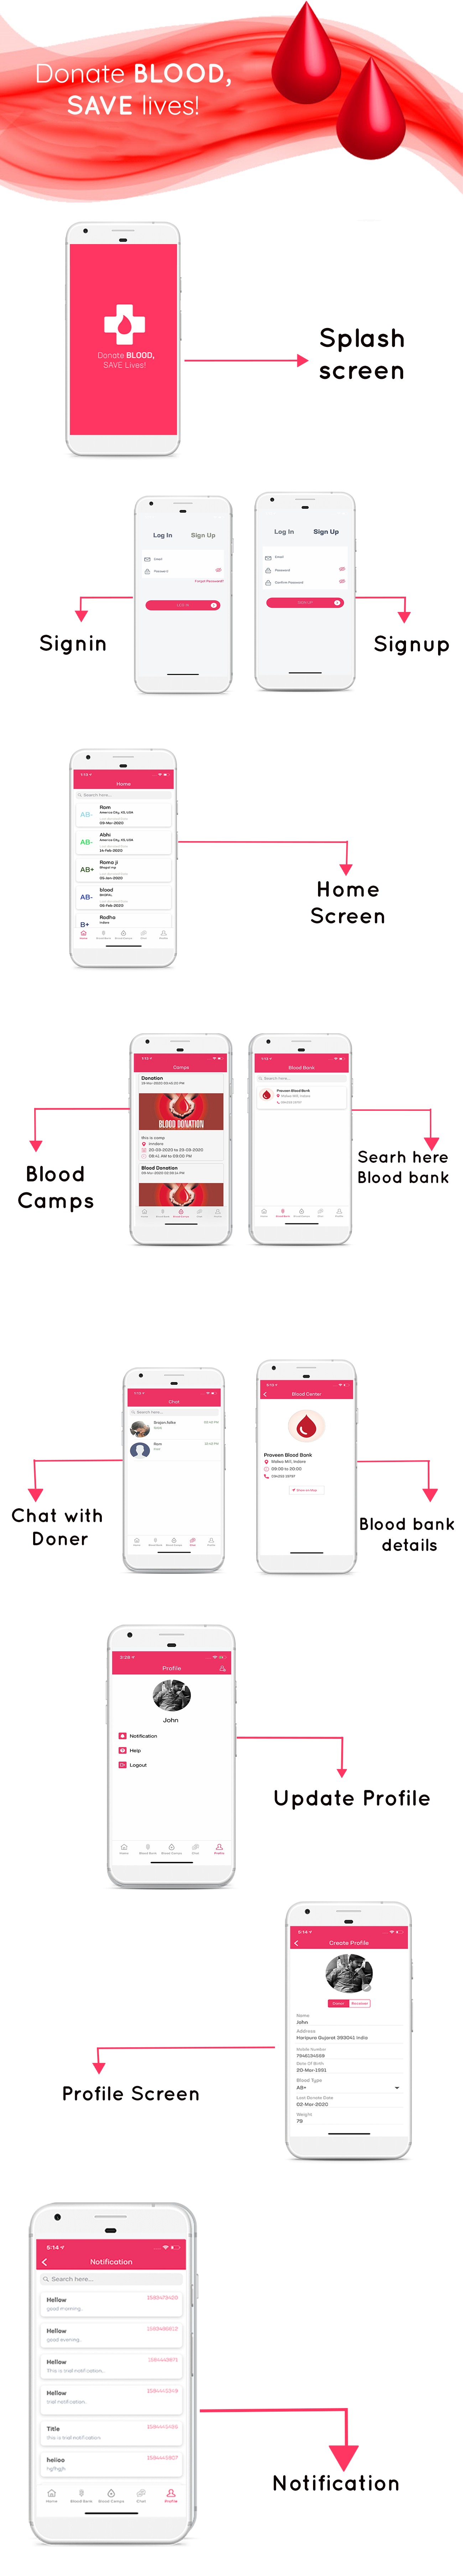 Blood Bank - iOS app for blood donner - 4